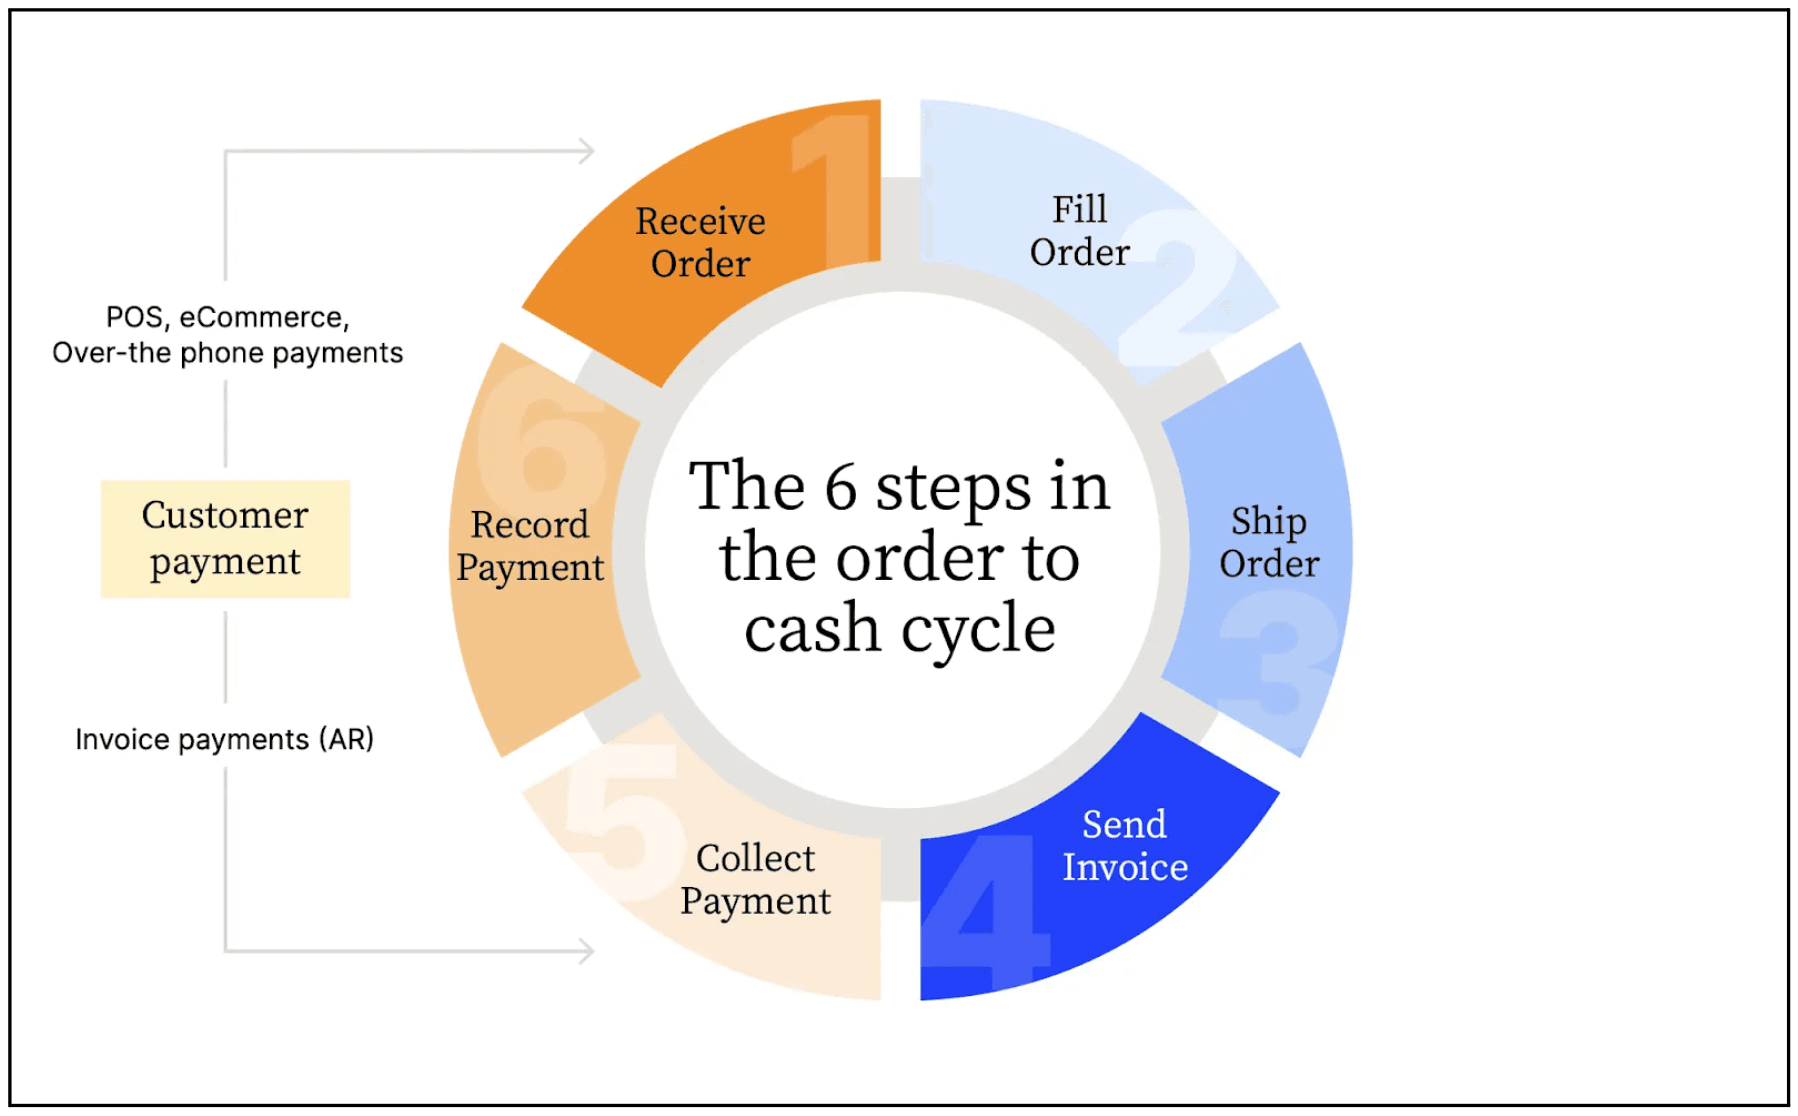 The steps in the order to cash cycle